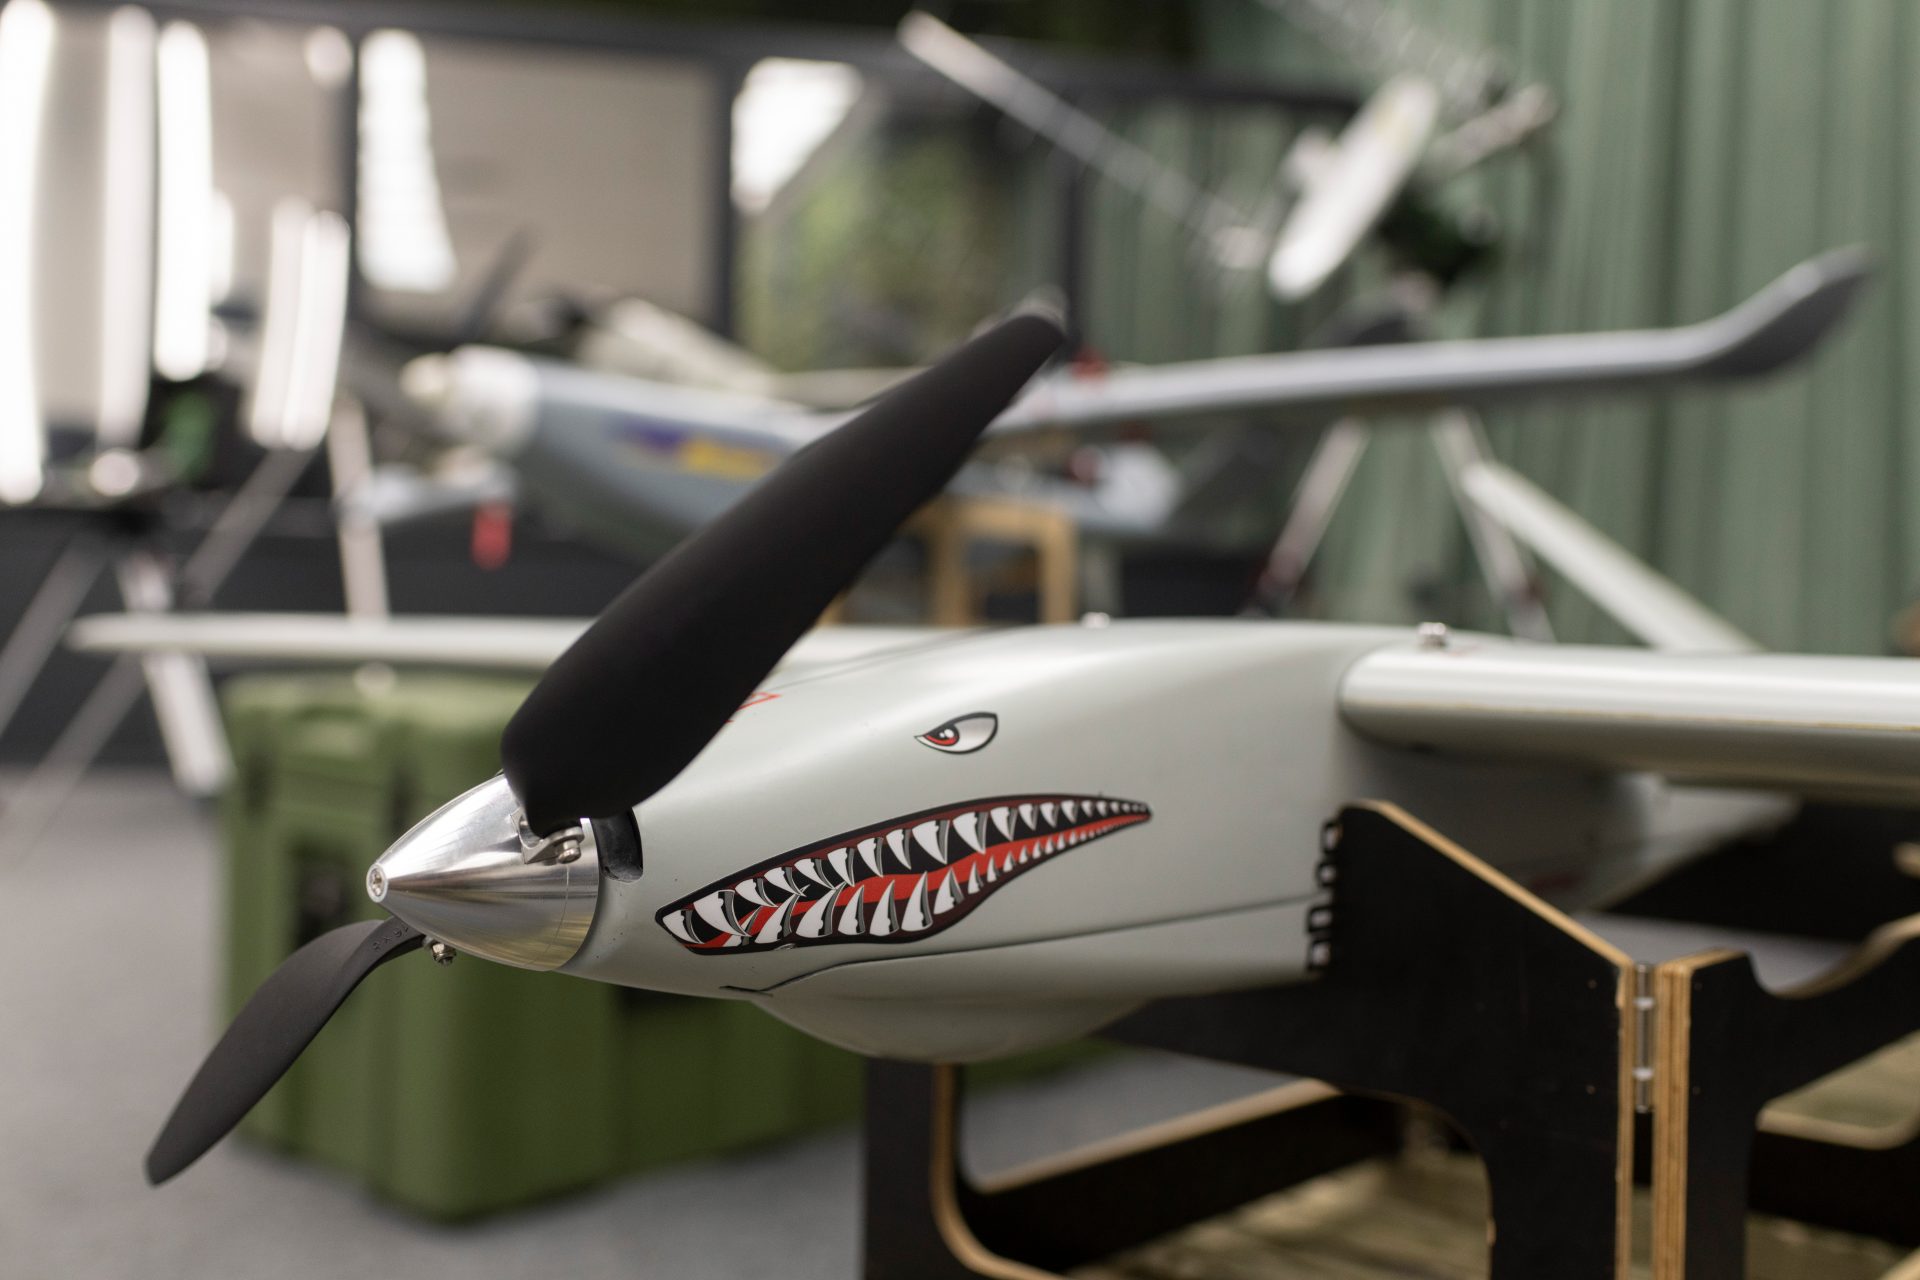 Will a new type of drone strategy change the future of warfare forever?